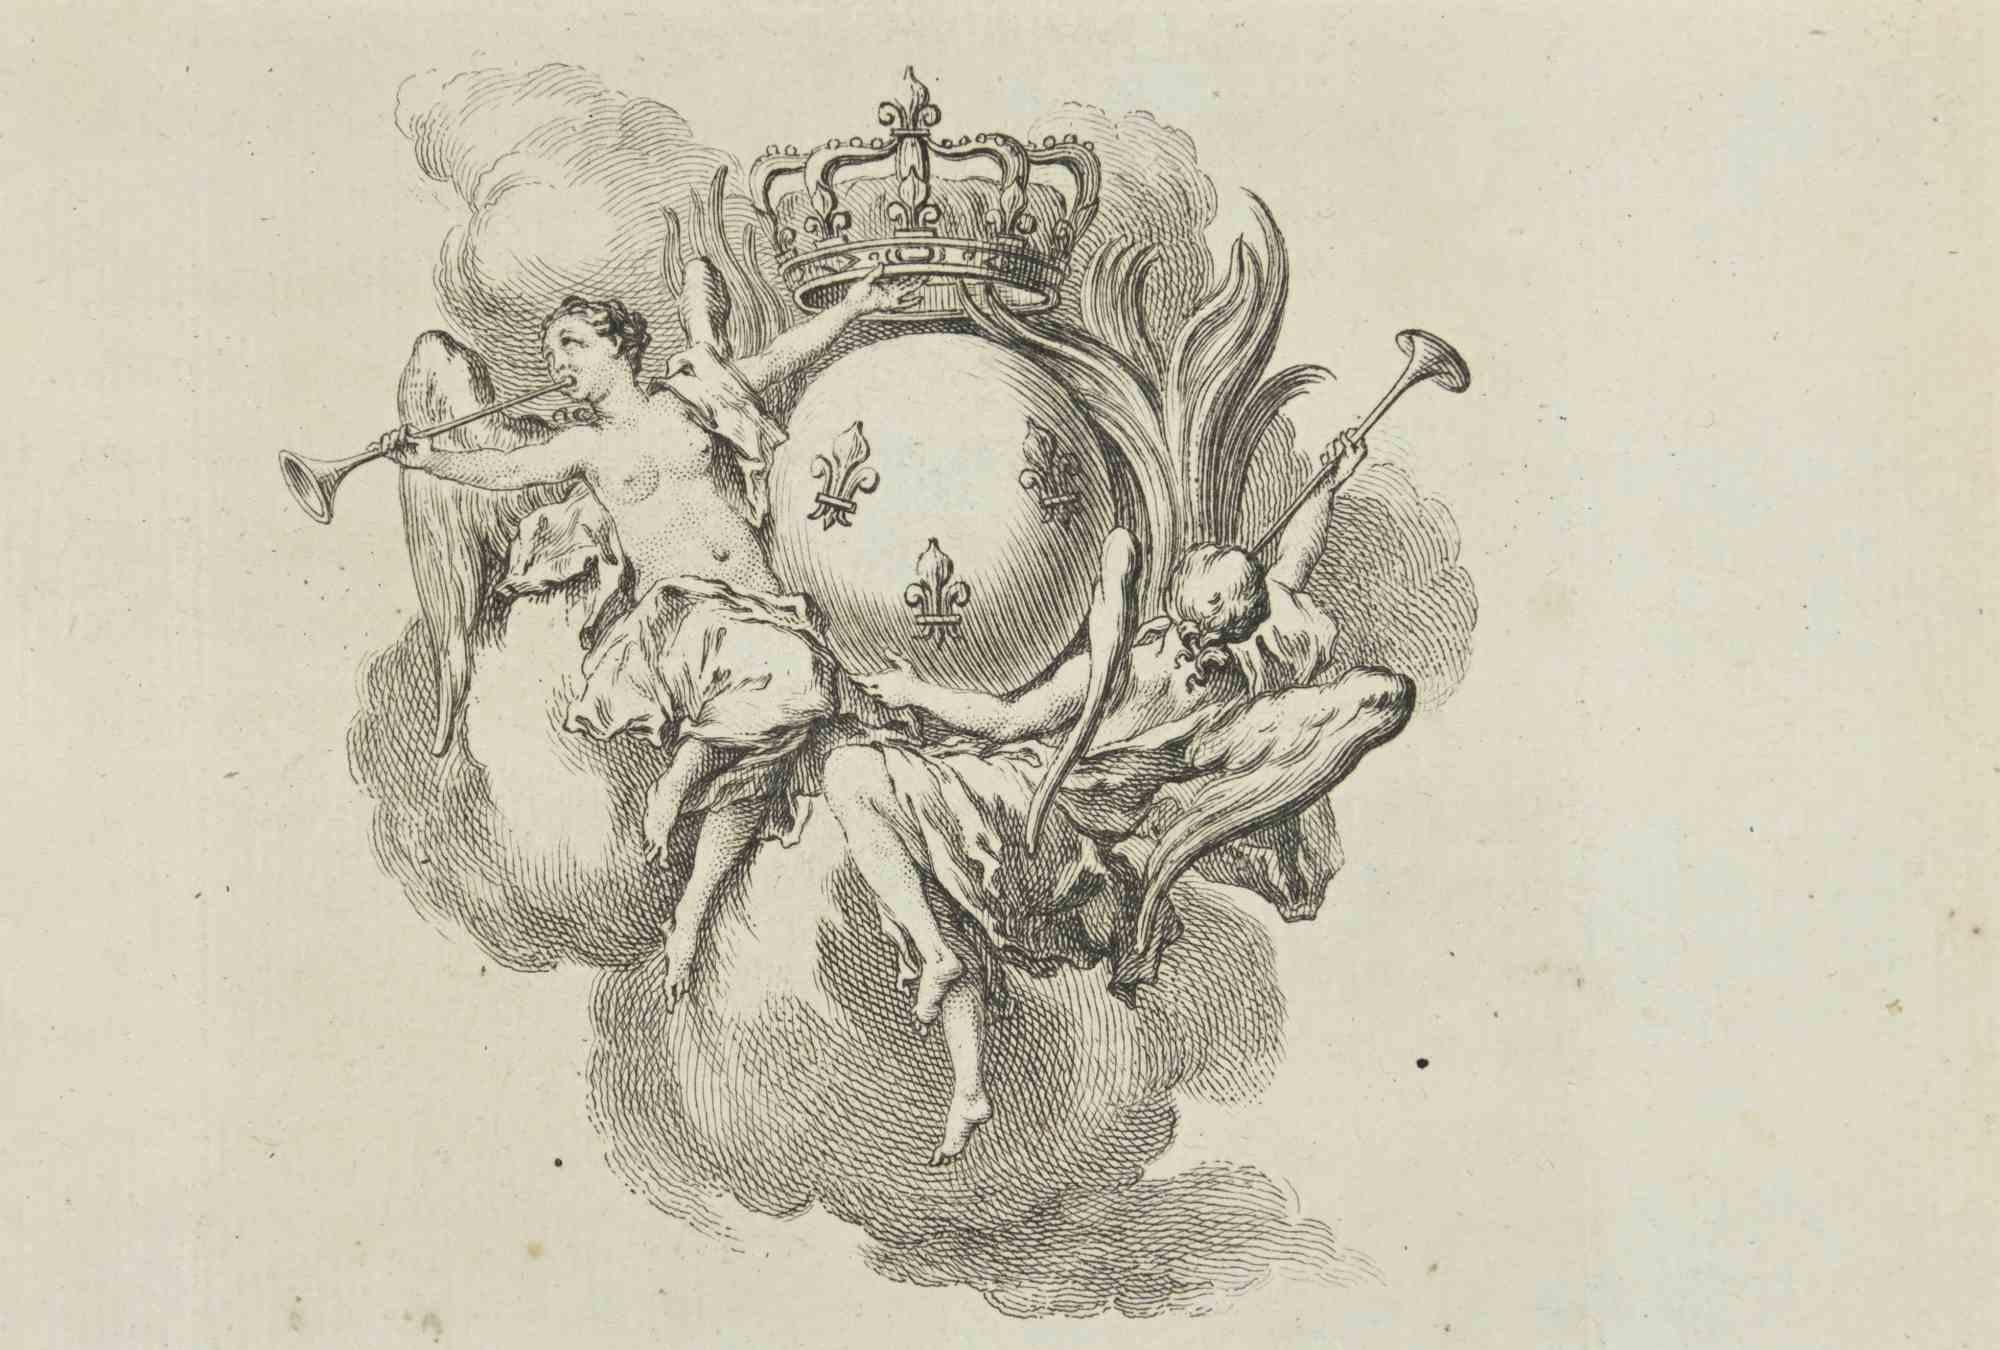 Composition with Angels is an etching realized in 1771 by Louis Legrand (1723-1807).

The Artwork is depicted through confident strokes in aa well balanced composition.

Good conditions.
 